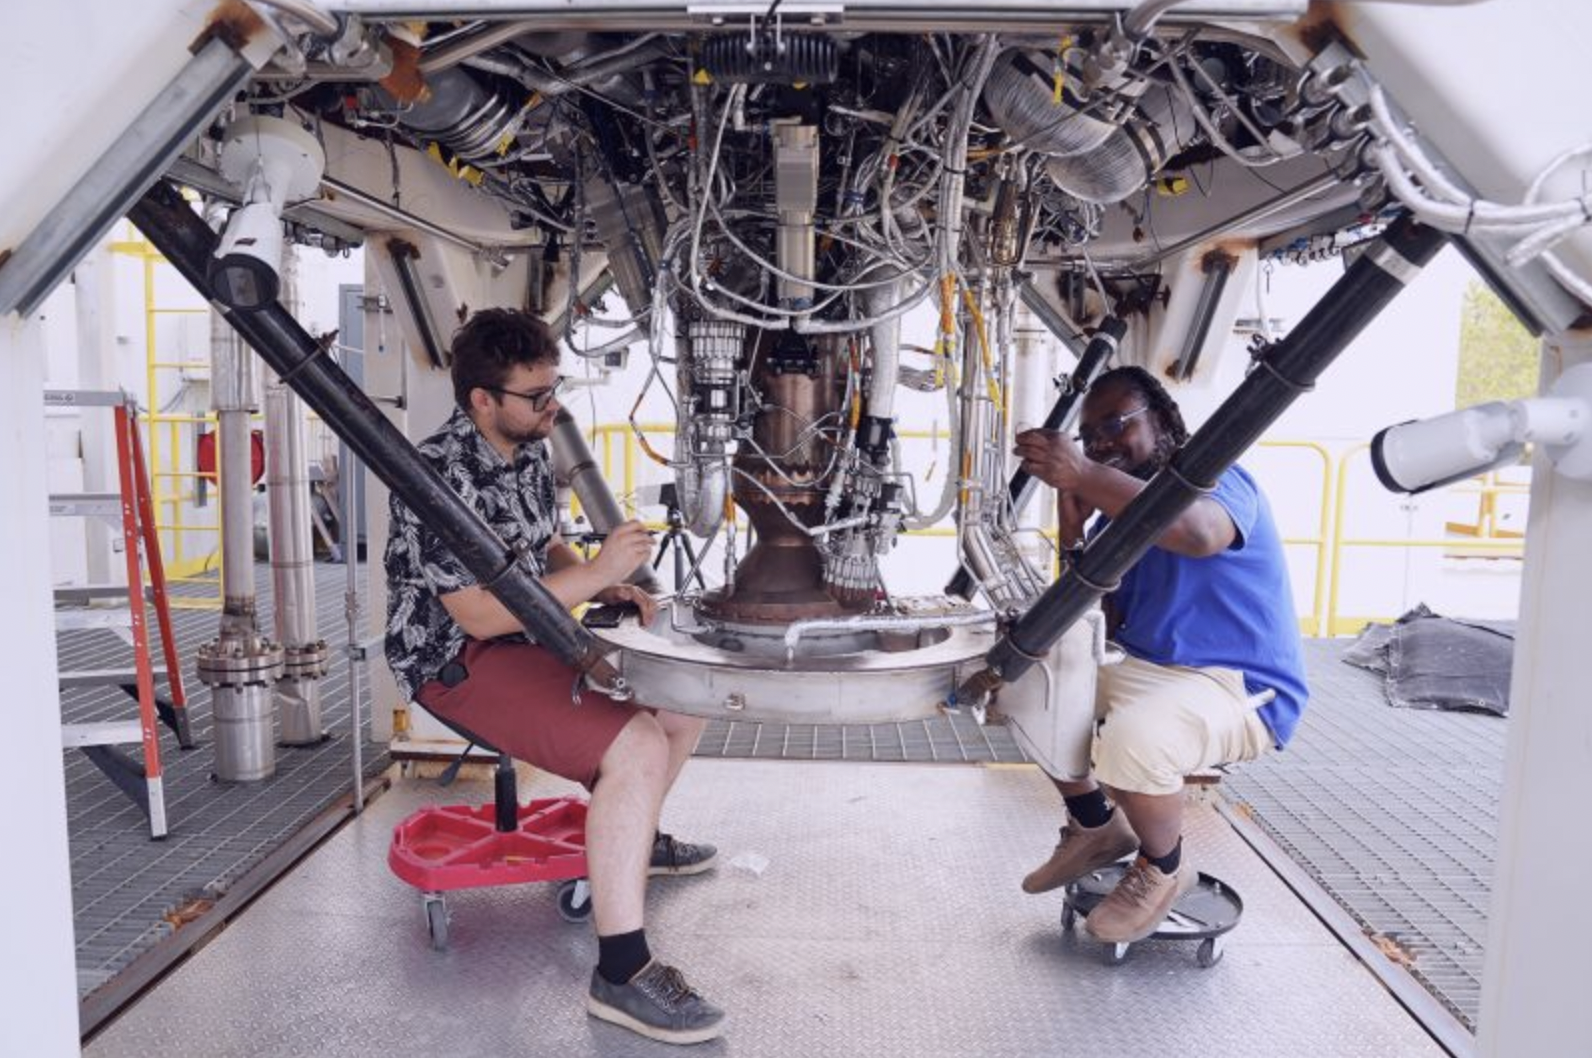 Behind-the-scenes photos of Relativity Space's world-class team at NASA Stennis Space Center working on the 3D printed Aeon Vac engine.